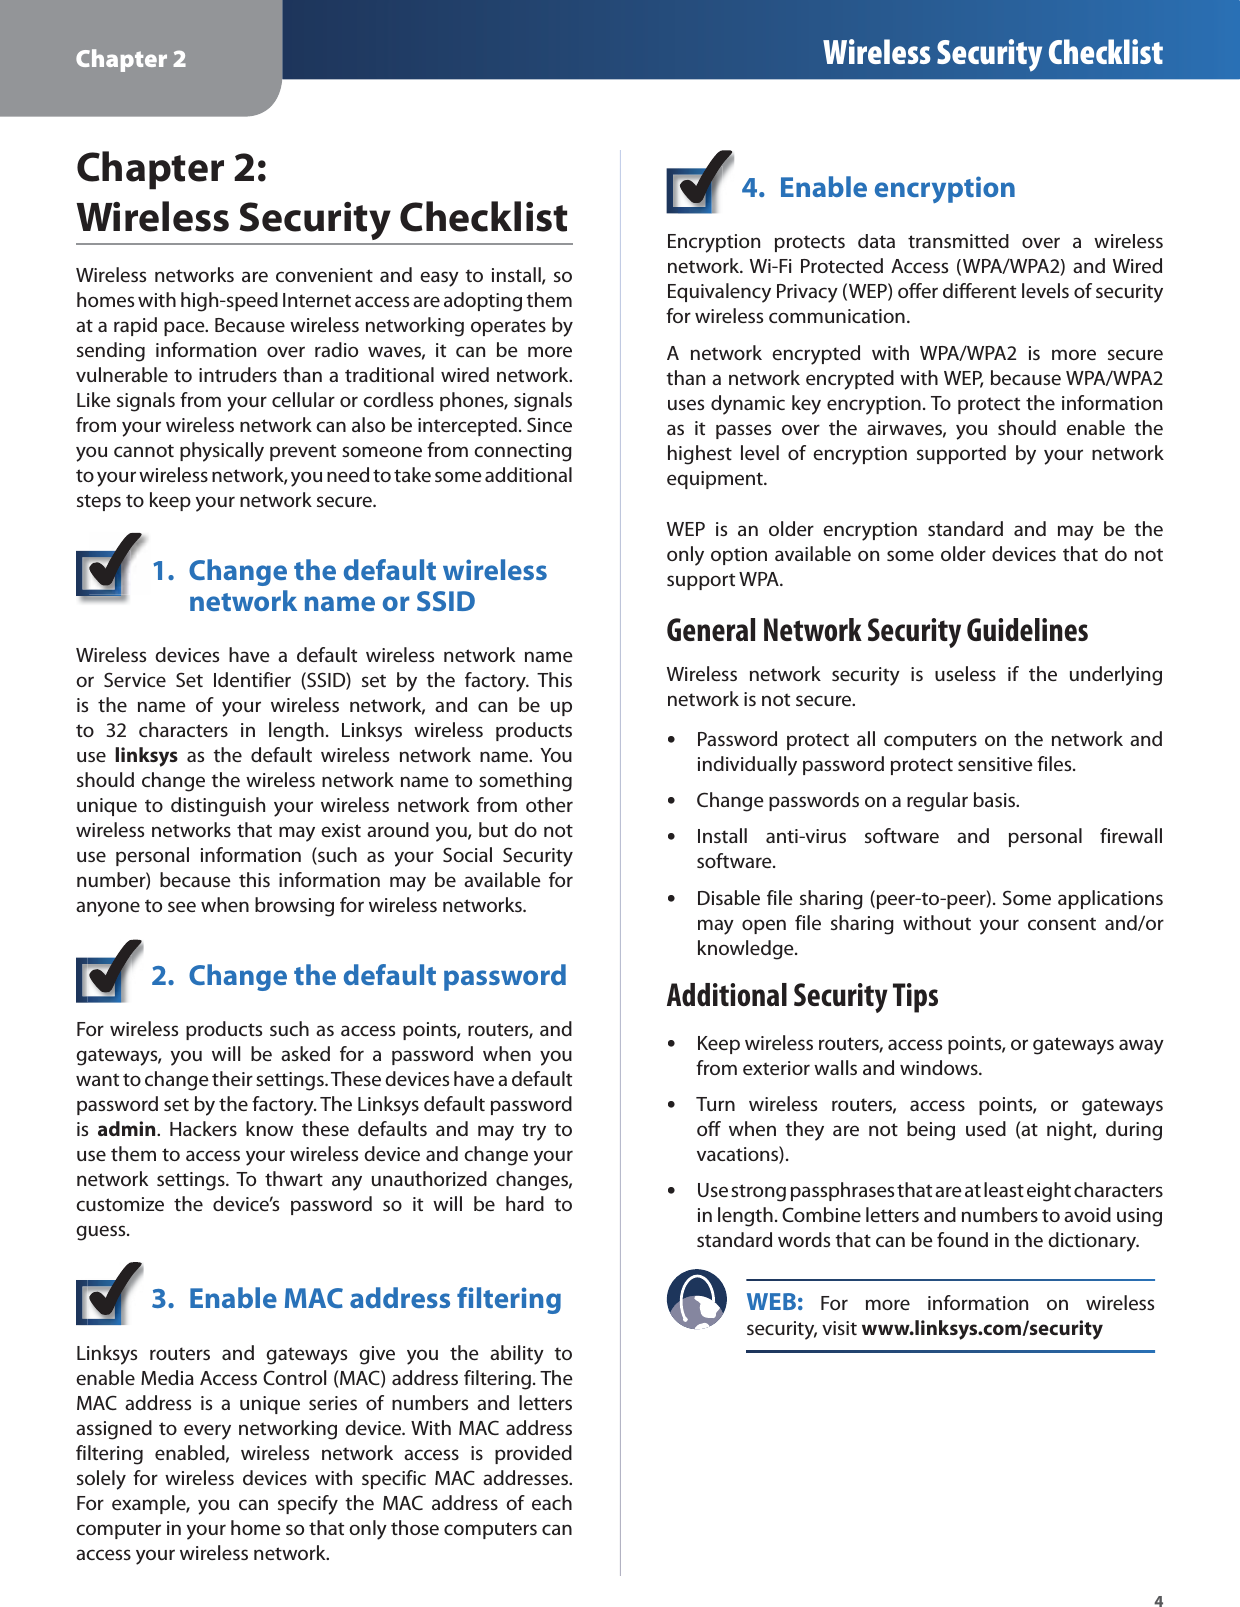 Chapter 2 Wireless Security Checklist4Chapter 2:  Wireless Security ChecklistWireless networks are convenient and easy to install, sohomes with high-speed Internet access are adopting themat a rapid pace. Because wireless networking operates bysending information over radio waves, it can be morevulnerable to intruders than a traditional wired network.Like signals from your cellular or cordless phones, signalsfrom your wireless network can also be intercepted. Sinceyou cannot physically prevent someone from connectingto your wireless network, you need to take some additionalsteps to keep your network secure.1. Change the default wireless network name or SSIDWireless devices have a default wireless network nameor Service Set Identifier (SSID) set by the factory. Thisis the name of your wireless network, and can be upto 32 characters in length. Linksys wireless productsuselinksys as the default wireless network name. Youshould change the wireless network name to somethingunique to distinguish your wireless network from otherwireless networks that may exist around you, but do notuse personal information (such as your Social Securitynumber) because this information may be available foranyone to see when browsing for wireless networks.2. Change the default passwordFor wireless products such as access points, routers, andgateways, you will be asked for a password when youwant to change their settings. These devices have a defaultpassword set by the factory. The Linksys default passwordisadmin. Hackers know these defaults and may try touse them to access your wireless device and change yournetwork settings. To thwart any unauthorized changes,customize the device’s password so it will be hard toguess.3. Enable MAC address filteringLinksys routers and gateways give you the ability toenable Media Access Control (MAC) address filtering. TheMAC address is a unique series of numbers and lettersassigned to every networking device. With MAC addressfiltering enabled, wireless network access is providedsolely for wireless devices with specific MAC addresses.For example, you can specify the MAC address of eachcomputer in your home so that only those computers canaccess your wireless network. 4. Enable encryptionEncryption protects data transmitted over a wirelessnetwork. Wi-Fi Protected Access (WPA/WPA2) and WiredEquivalency Privacy (WEP) offer different levels of securityfor wireless communication.A network encrypted with WPA/WPA2 is more securethan a network encrypted with WEP, because WPA/WPA2uses dynamic key encryption. To protect the informationas it passes over the airwaves, you should enable thehighest level of encryption supported by your network equipment. WEP is an older encryption standard and may be theonly option available on some older devices that do notsupport WPA.General Network Security GuidelinesWireless network security is useless if the underlyingnetwork is not secure.Password protect all computers on the network andsindividually password protect sensitive files.Change passwords on a regular basis.sInstall anti-virus software and personal firewallssoftware.Disable file sharing (peer-to-peer). Some applicationssmay open file sharing without your consent and/orknowledge.Additional Security TipsKeep wireless routers, access points, or gateways awaysfrom exterior walls and windows.Turn wireless routers, access points, or gatewayssoff when they are not being used (at night, duringvacations).Use strong passphrases that are at least eight characterssin length. Combine letters and numbers to avoid usingstandard words that can be found in the dictionary.WEB: For more information on wirelesssecurity, visit www.linksys.com/security